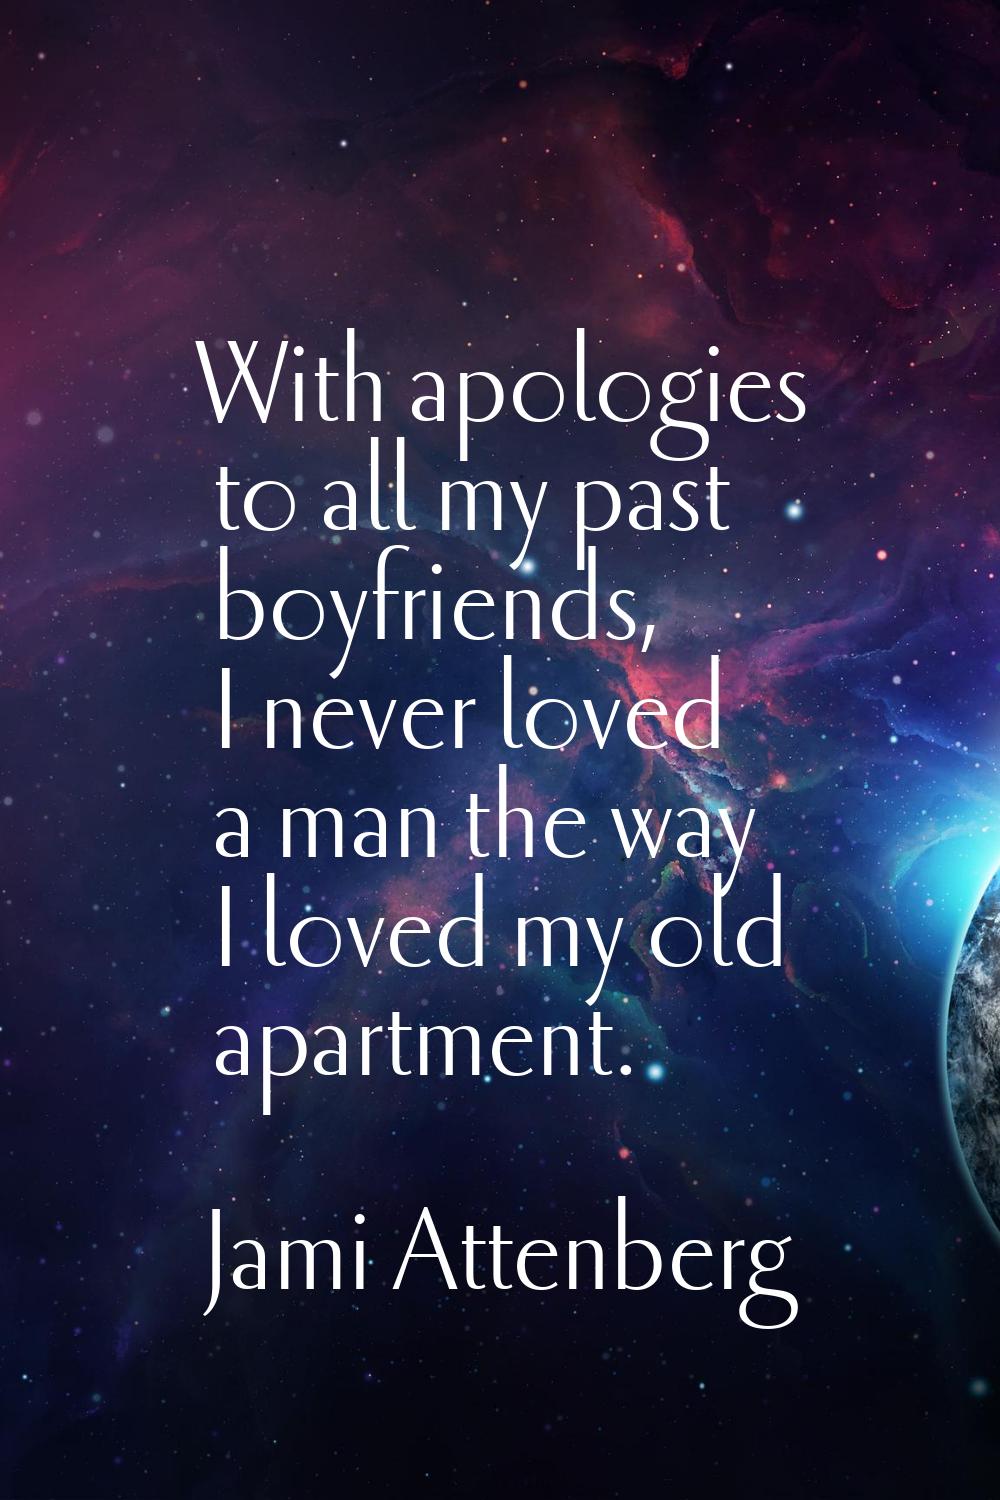 With apologies to all my past boyfriends, I never loved a man the way I loved my old apartment.